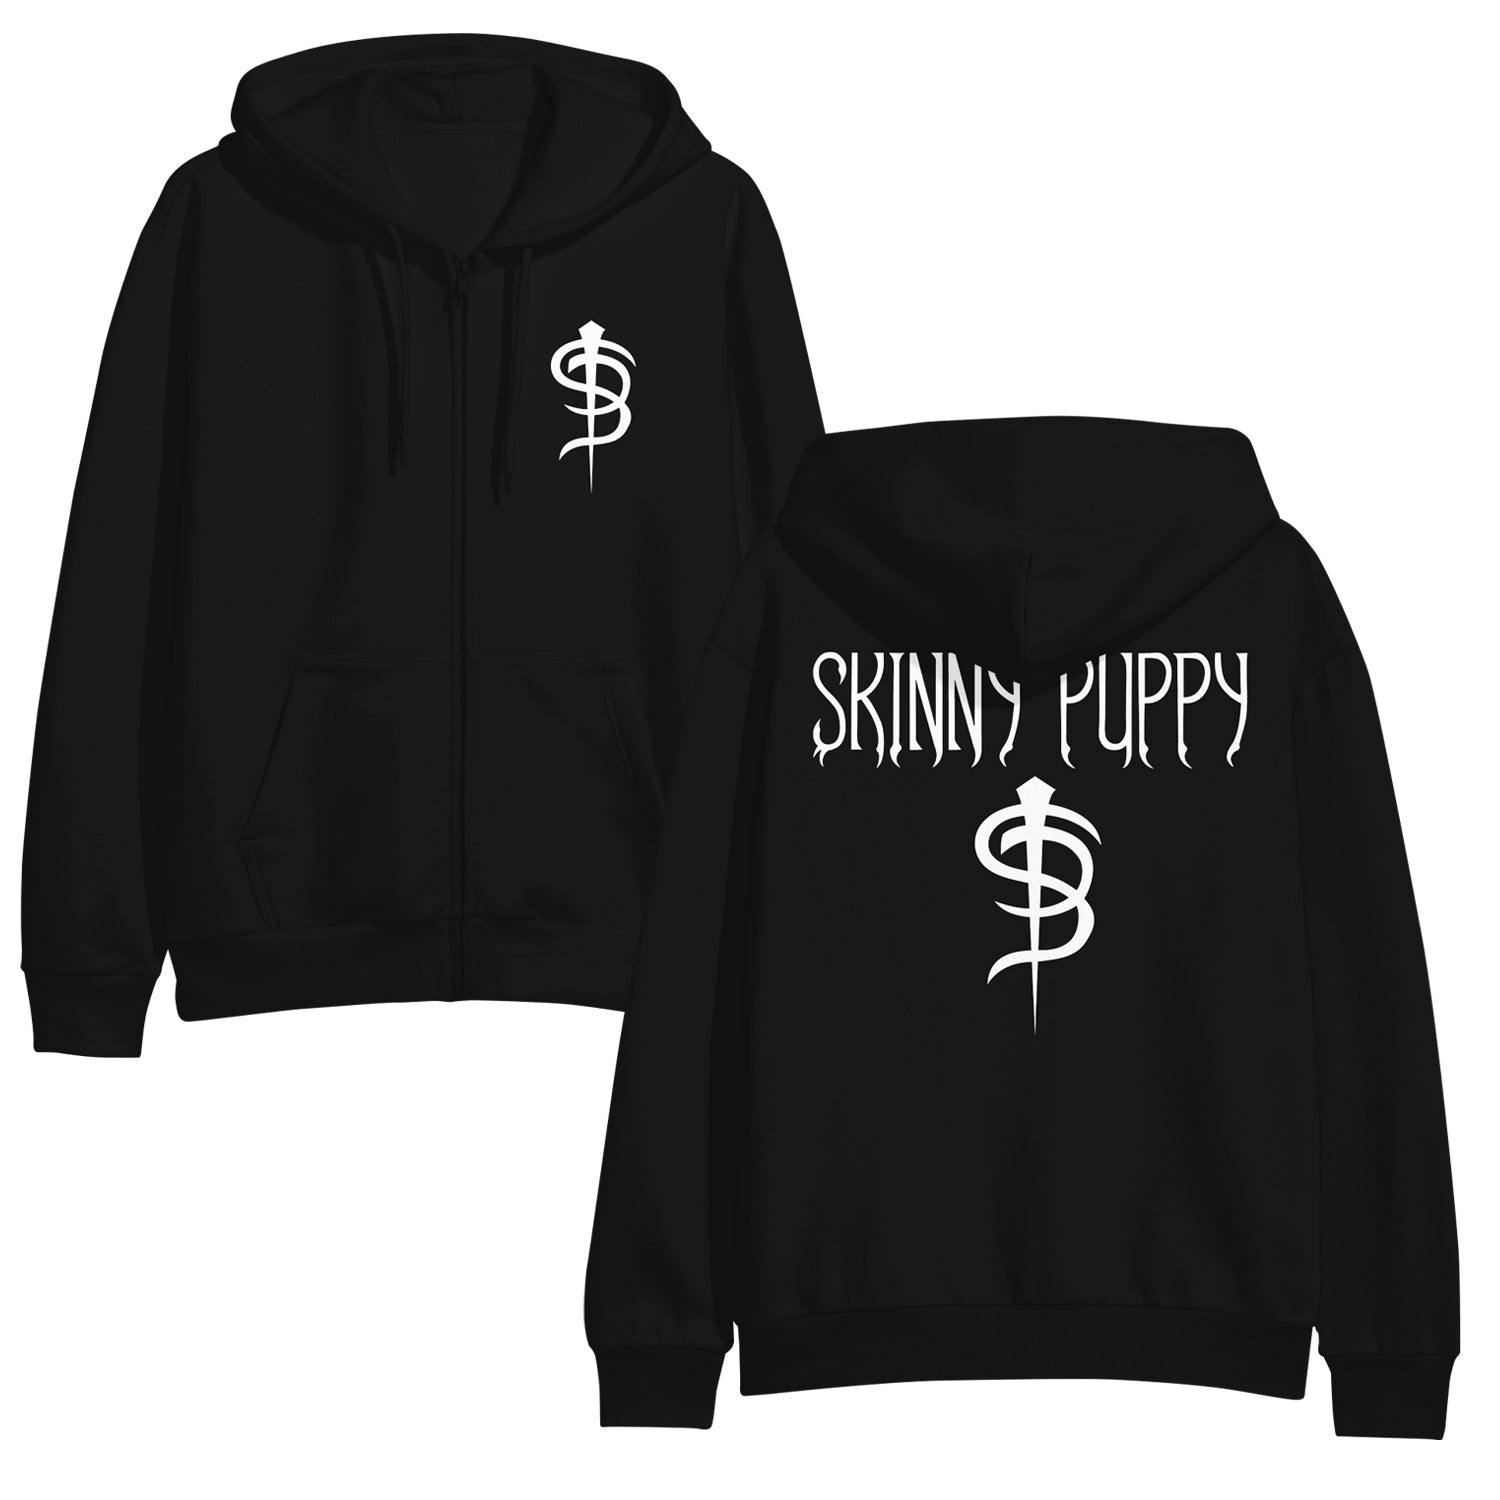  Image of the front and back of a Black hooded sweatshirt on a white background. The front of the hoodie on the left chest is the skinny puppy SP logo in white. The back of the sweatshirt by the shoulder area says Skinny Puppy and below that features the SP logo. The back print on the hoodie is also in white.